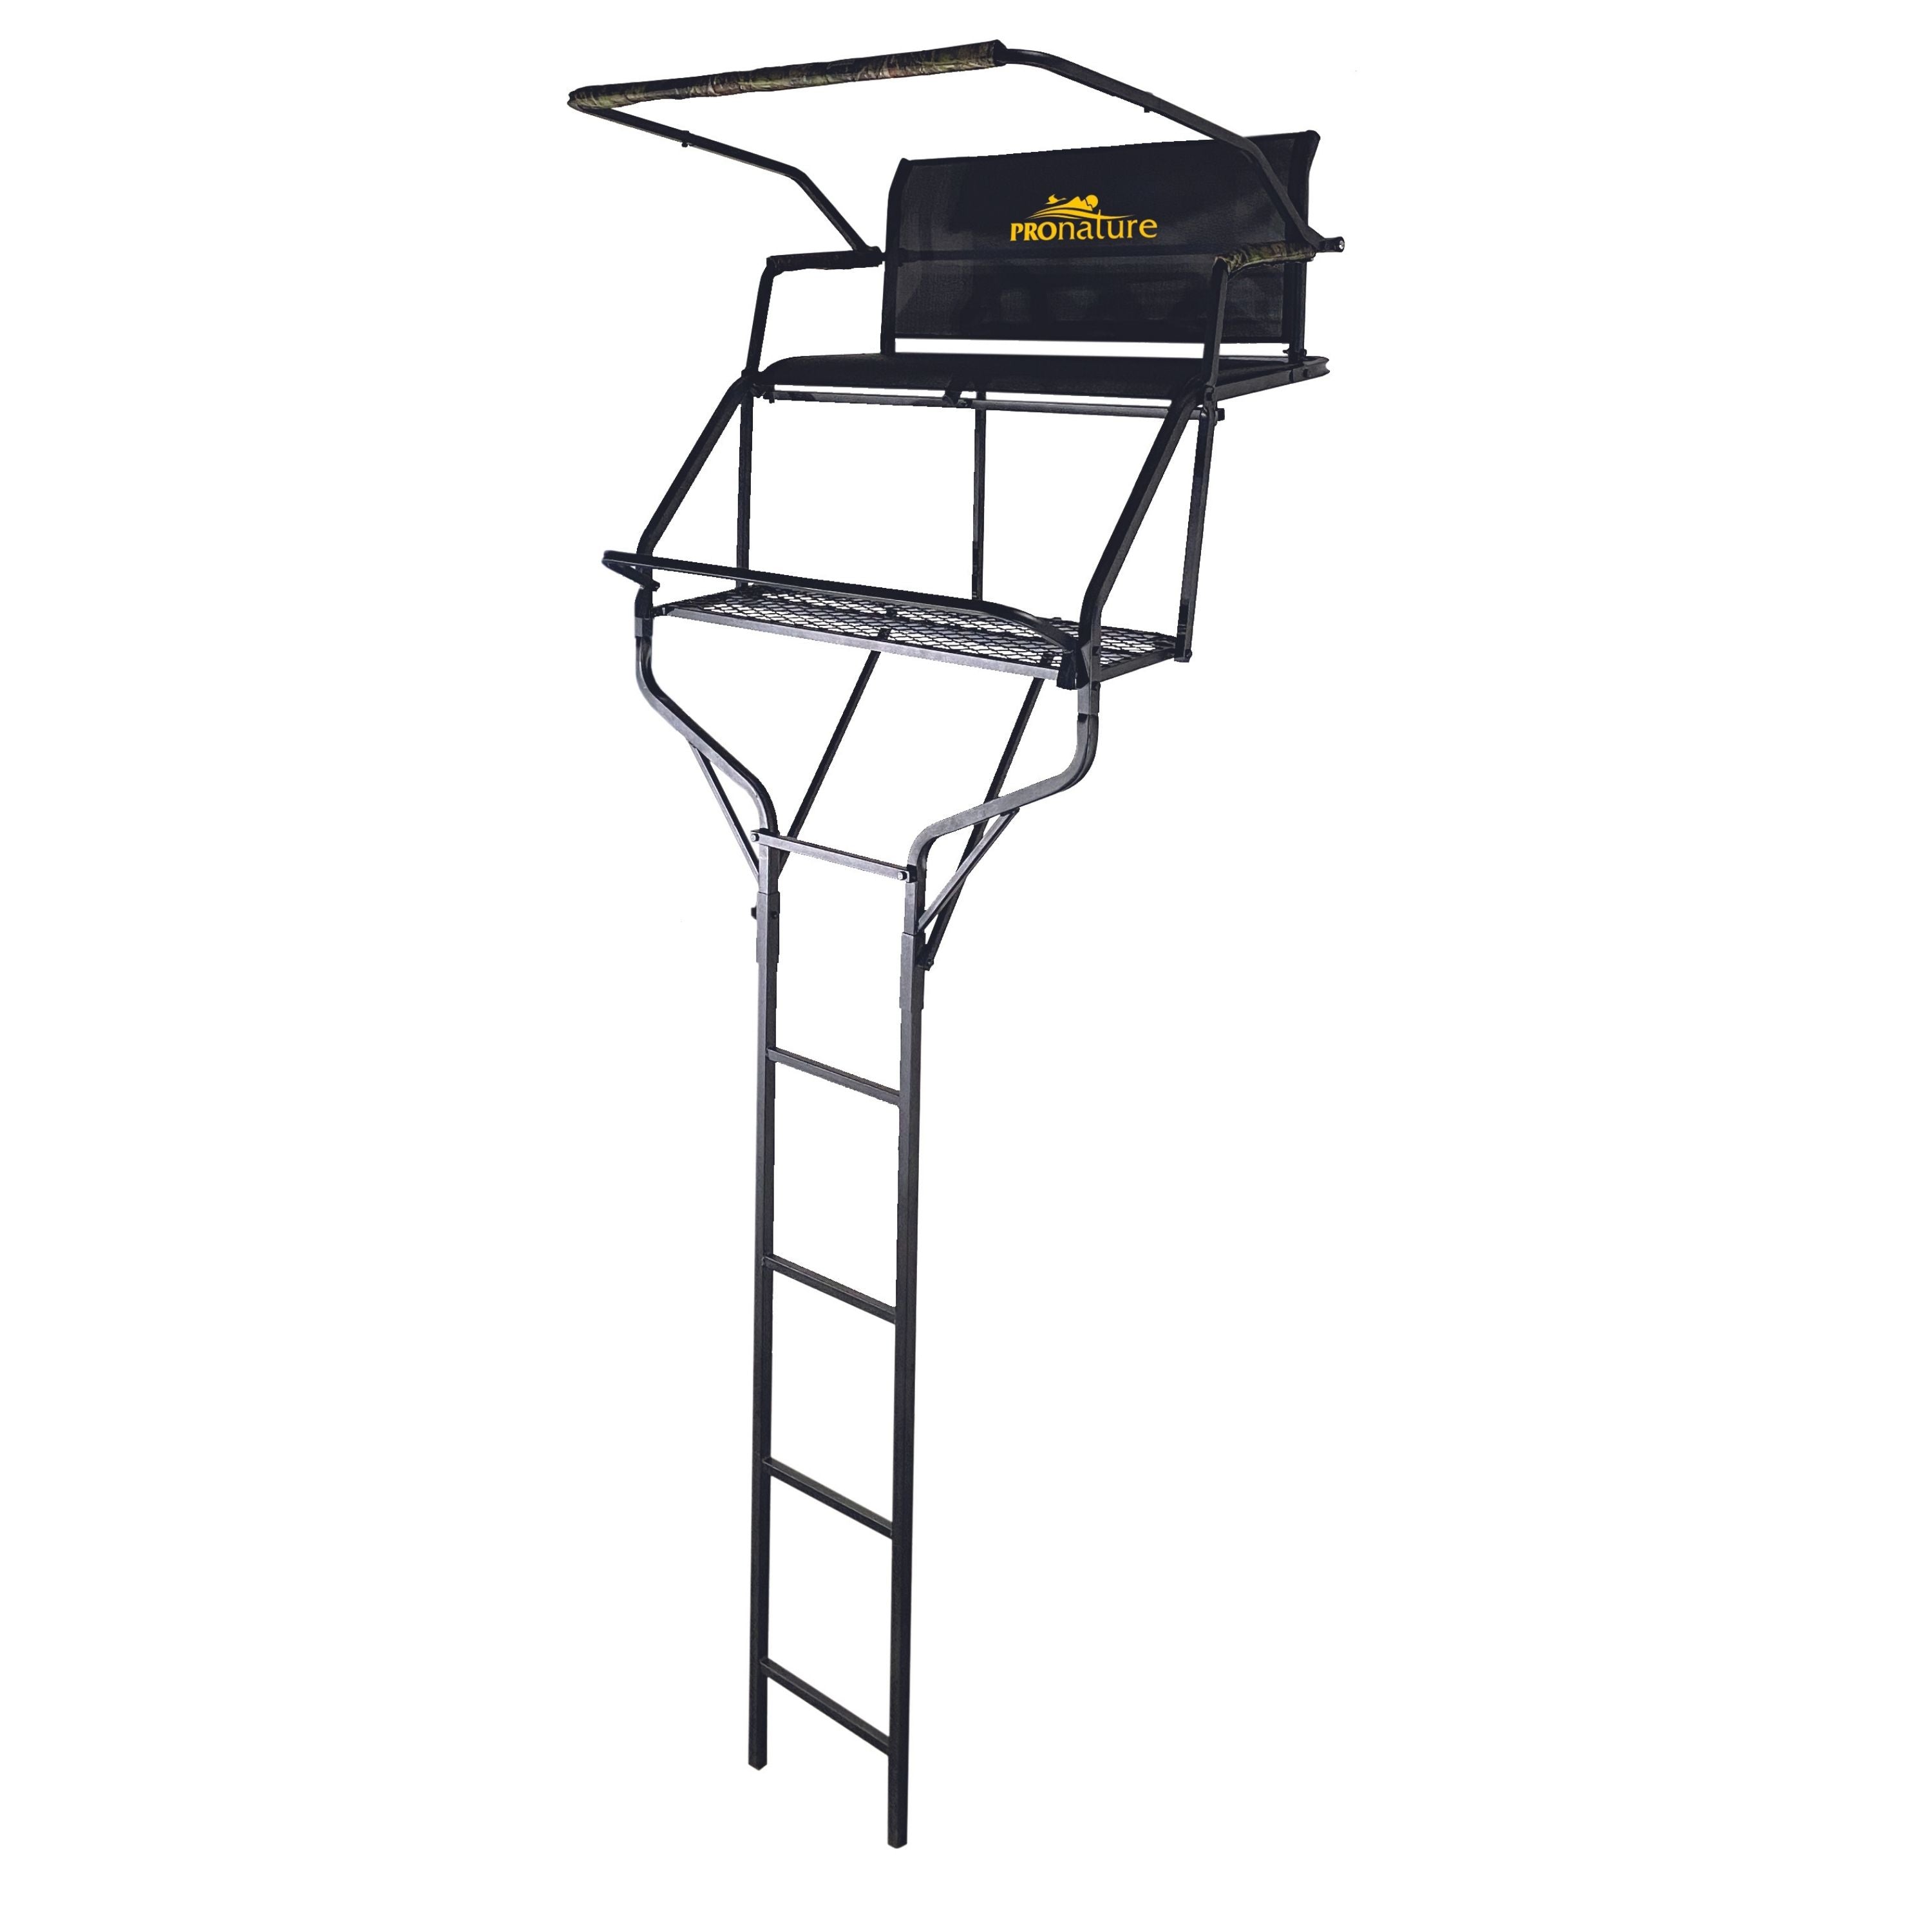 Mirador pour 2 personnes||Hunting treestand - 2 person